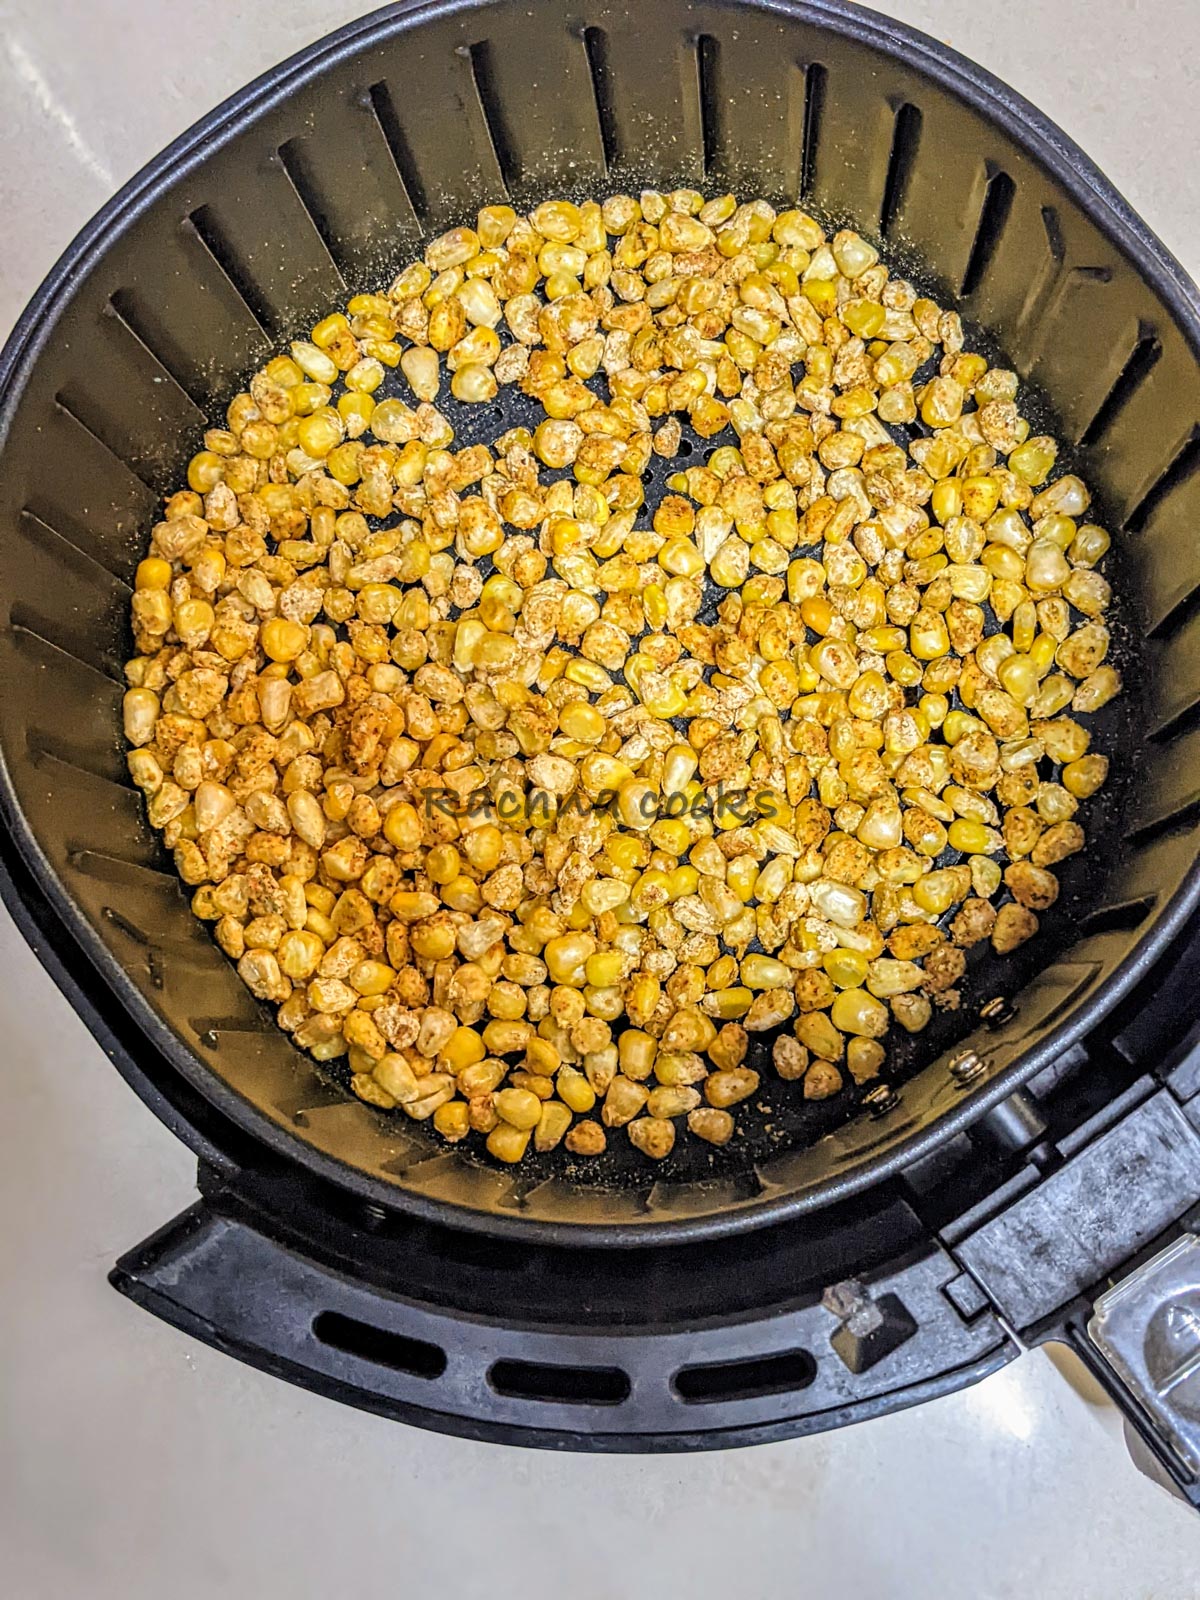 Corn kernels in air fryer with spices